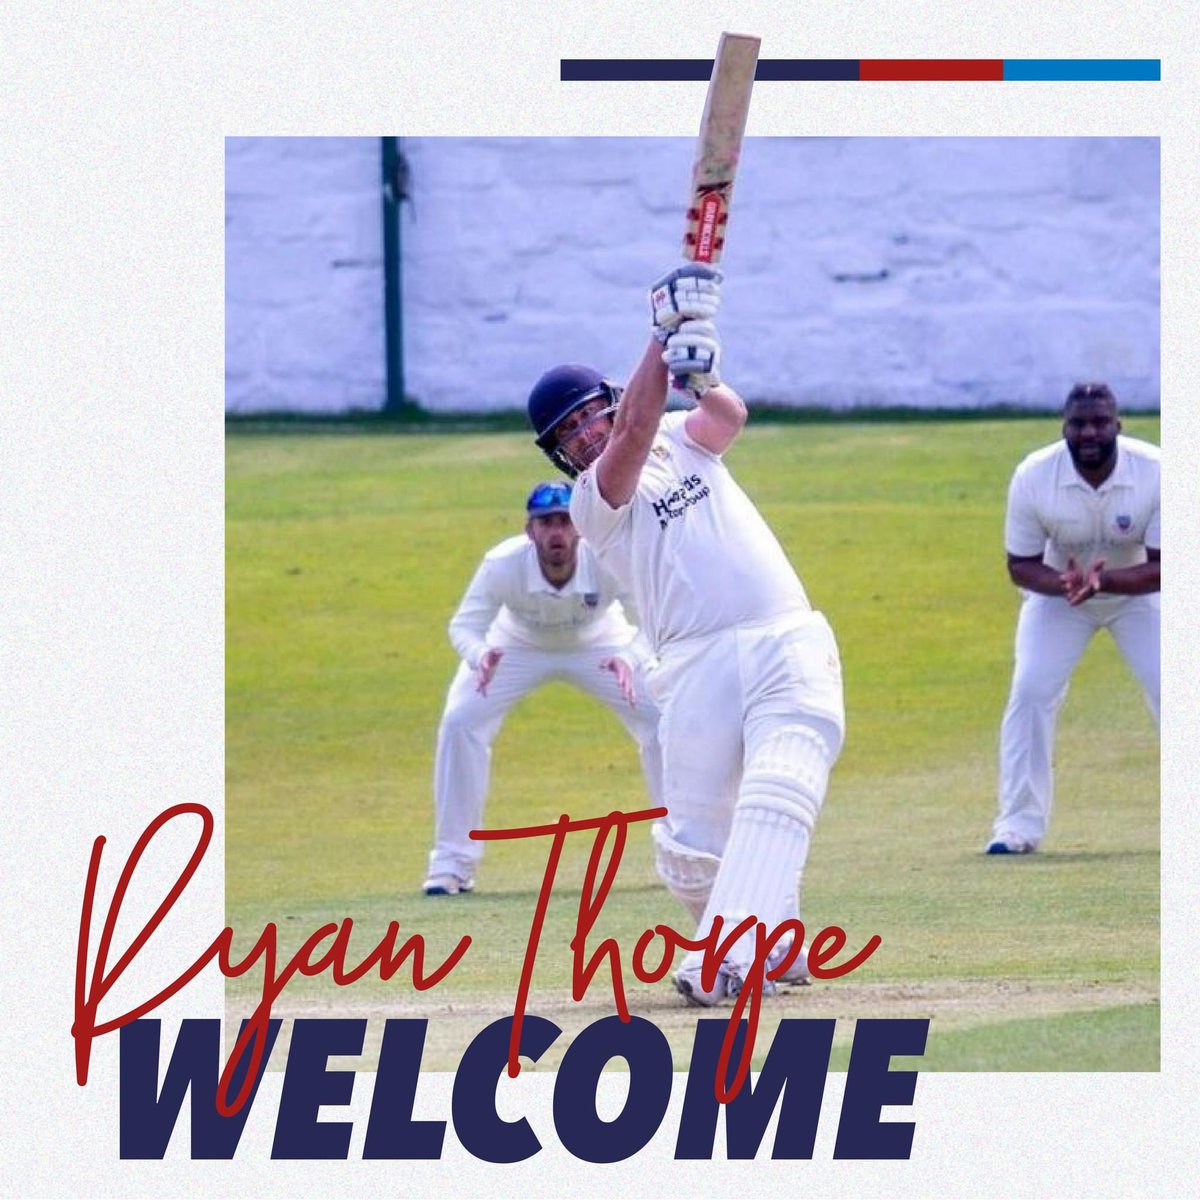 𝗡𝗘𝗪 𝗦𝗜𝗚𝗡𝗜𝗡𝗚 ✍️ We're delighted to announce the arrival of Ryan Thorpe! The high quality, top order batsman is heading to The Parks for the 2024 summer! 💙